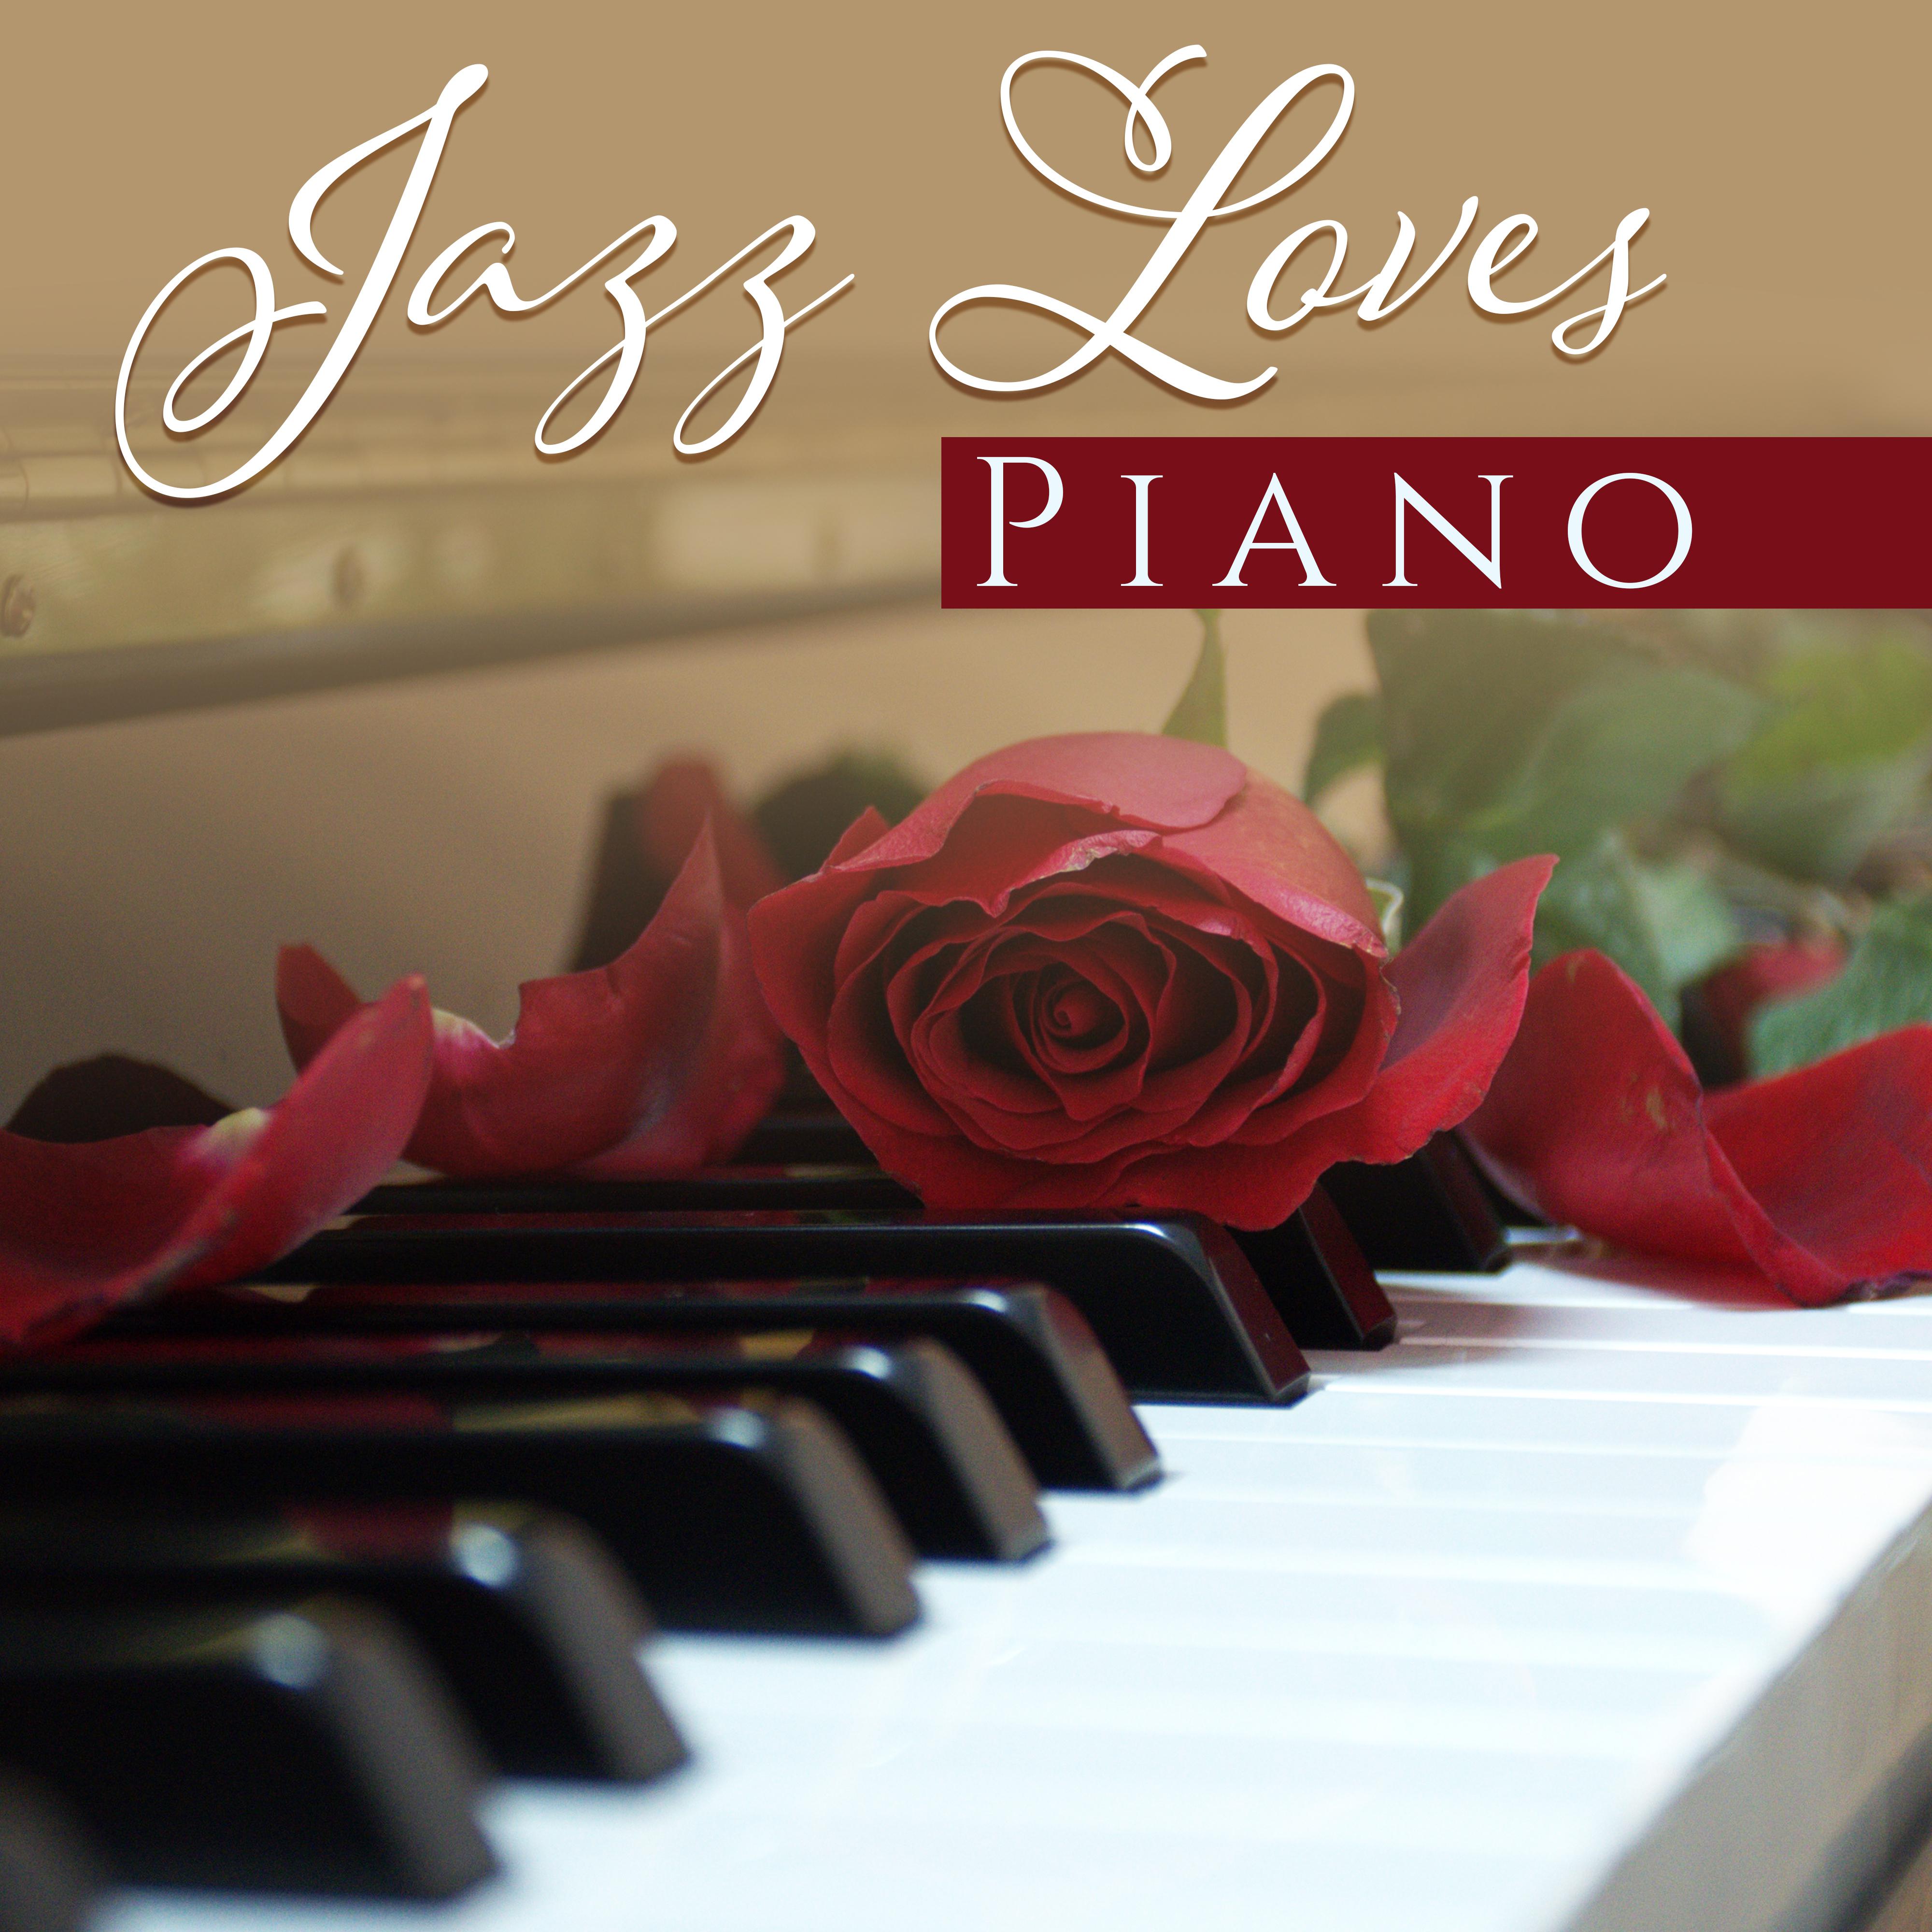 Jazz Loves Piano – 15 Relaxing Songs to Rest, Mellow Jazz, Stress Relief, Soft Music After Work